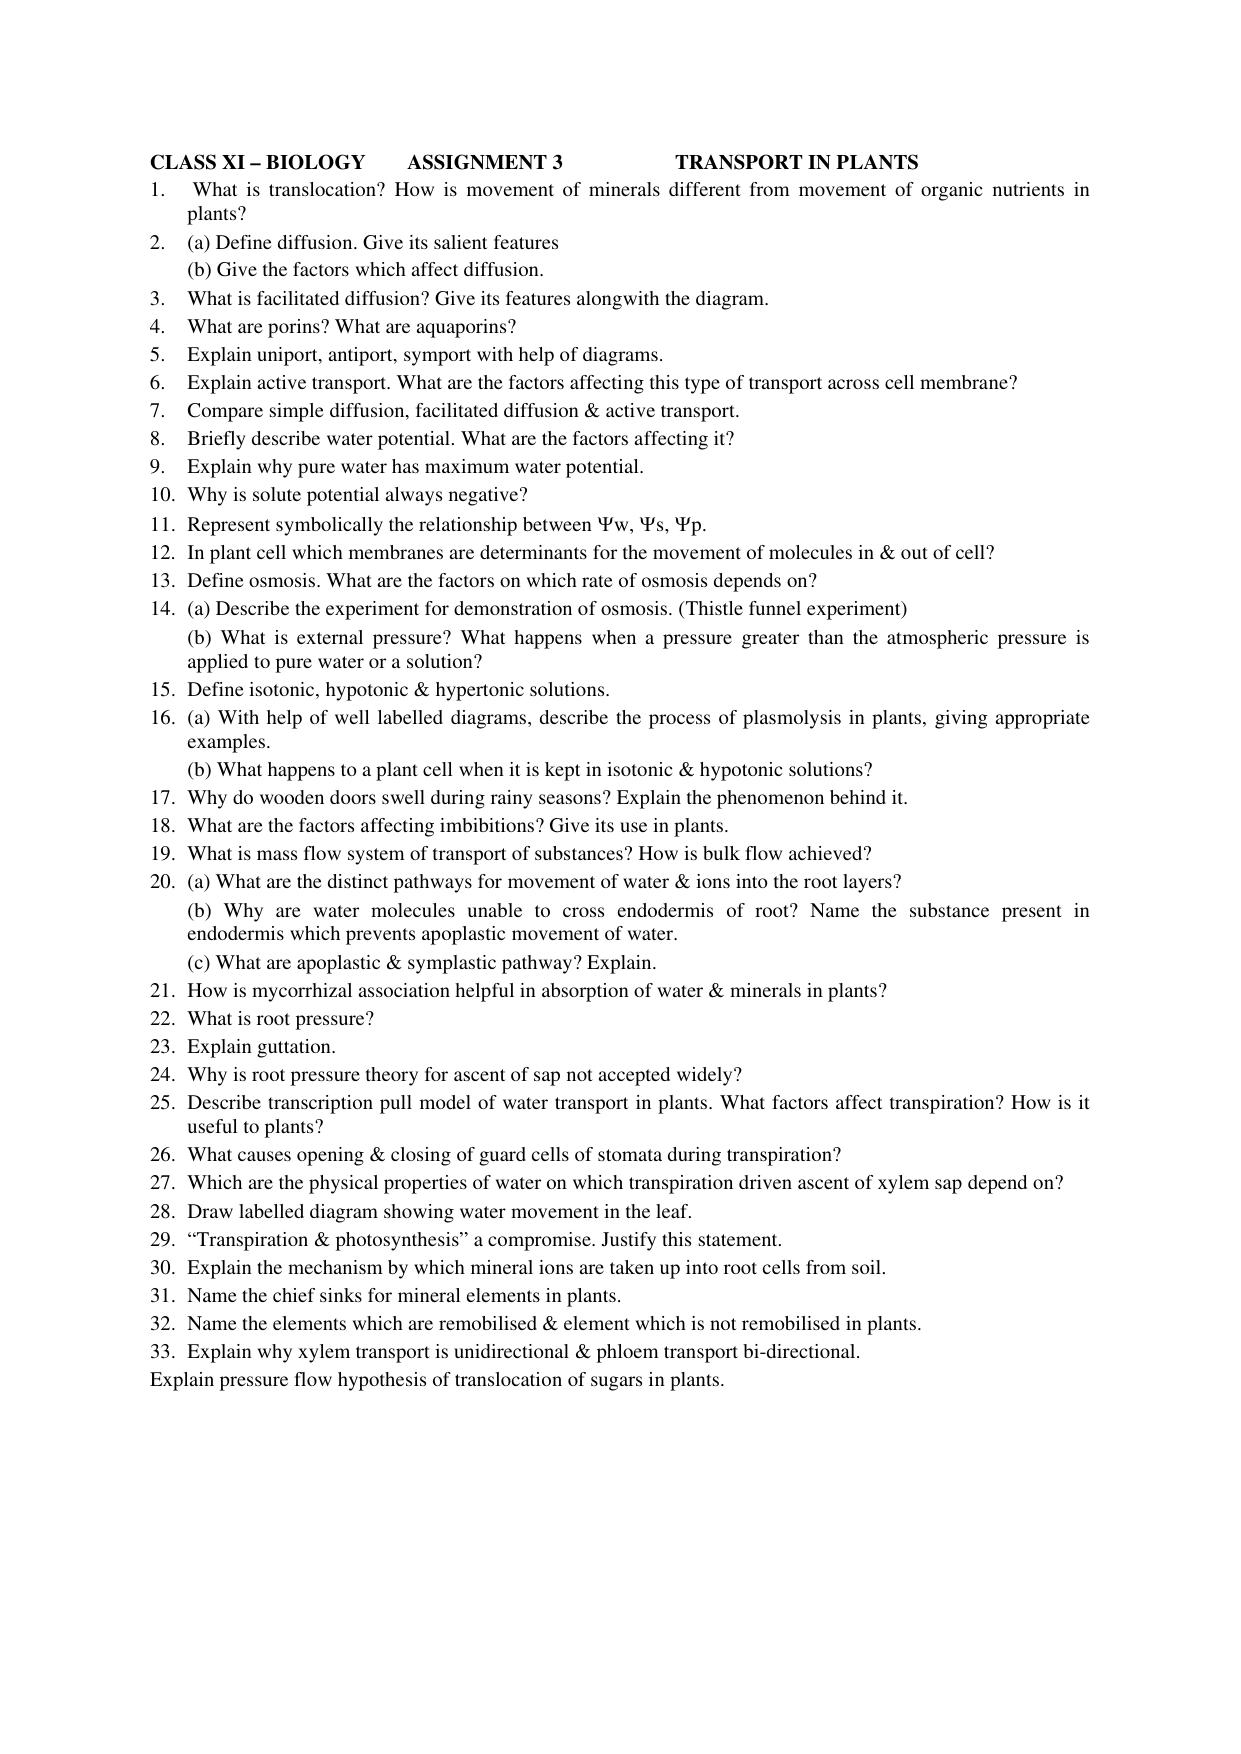 CBSE Worksheets for Class 11 Biology Assignment 3 - Page 1